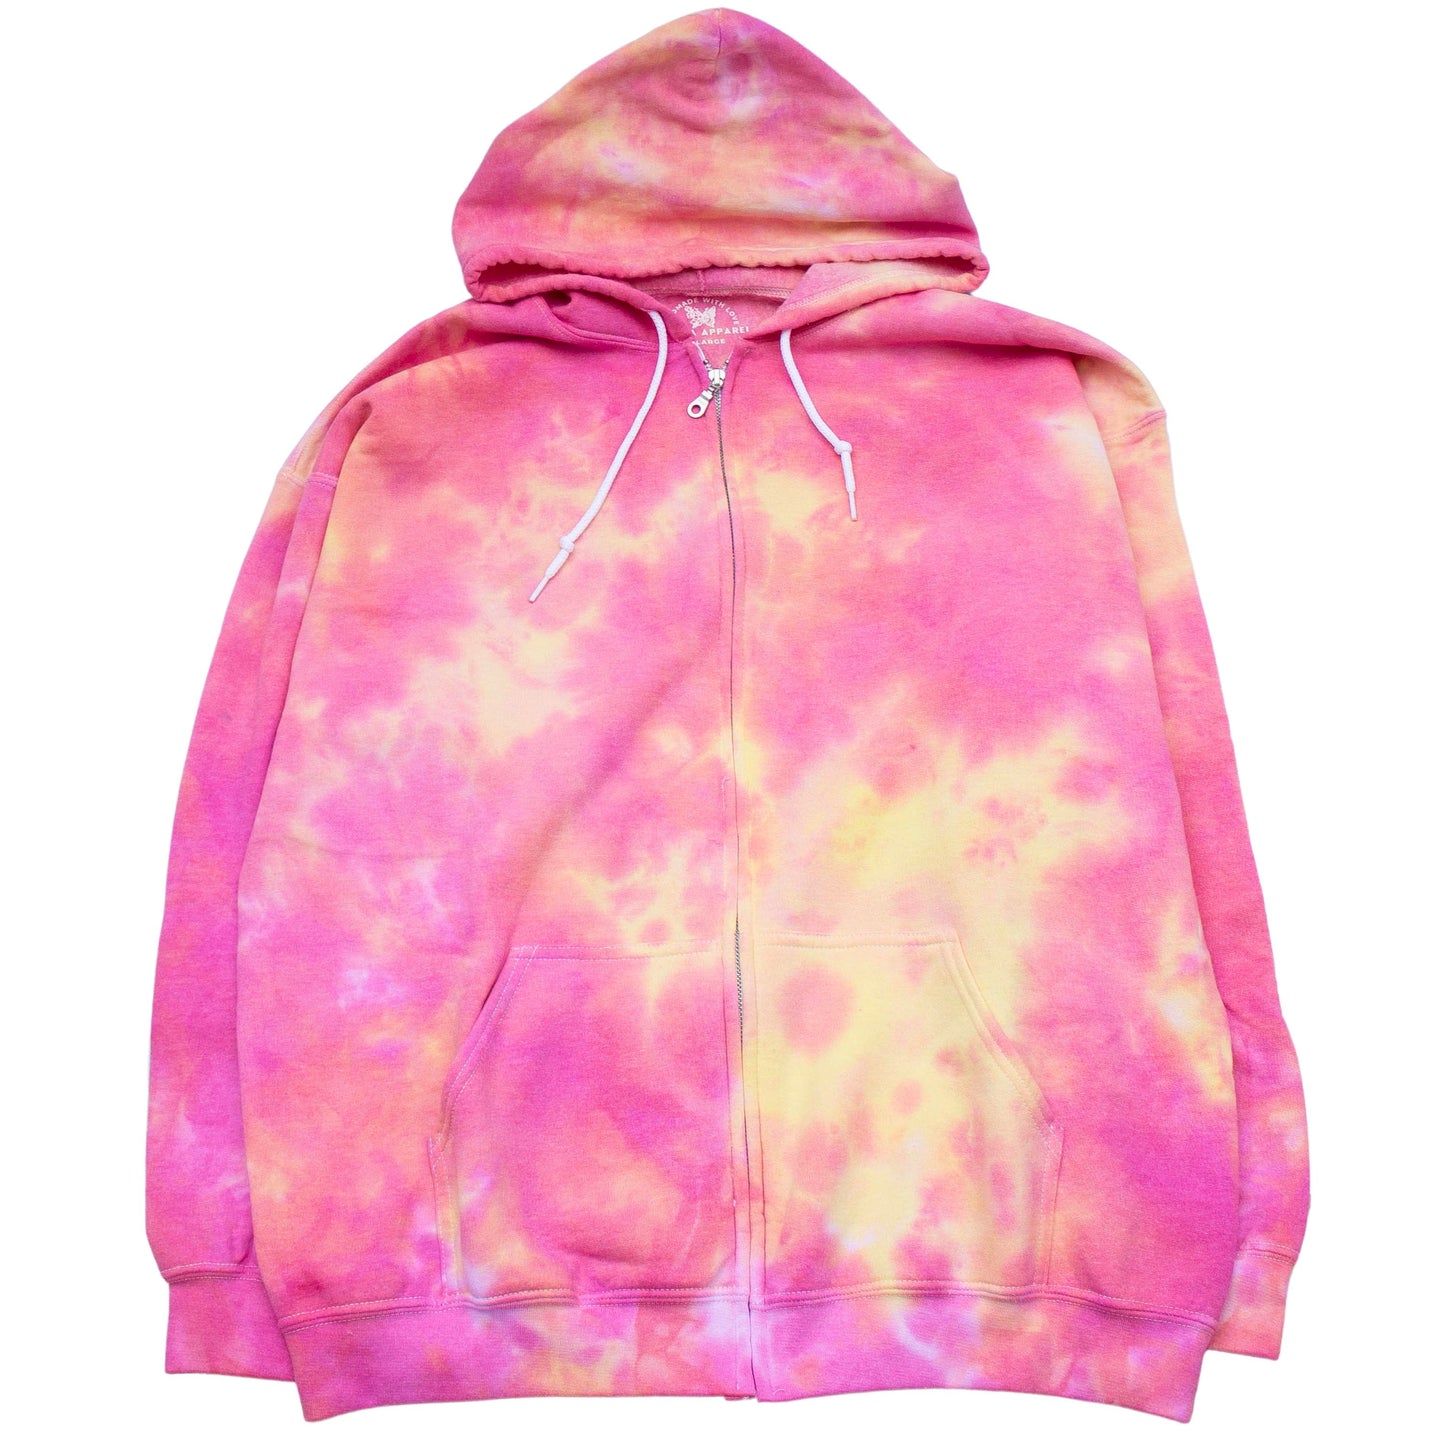 Size XL: Unique Tie-Dye Hoodie - Immerse in Sun-Kissed Pinks & Yellows with This Distinctive Design